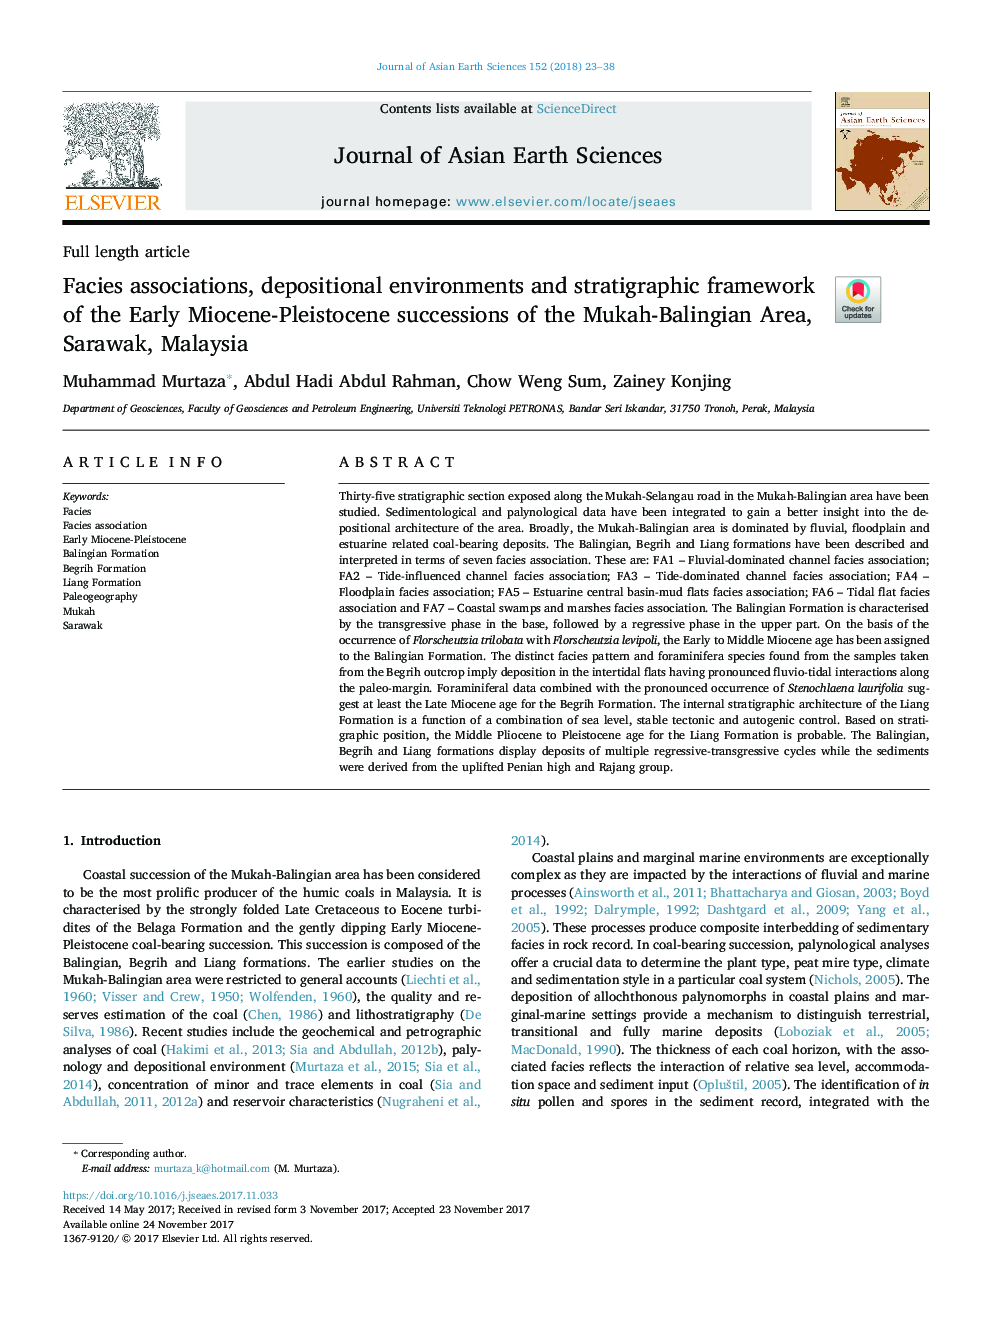 Facies associations, depositional environments and stratigraphic framework of the Early Miocene-Pleistocene successions of the Mukah-Balingian Area, Sarawak, Malaysia